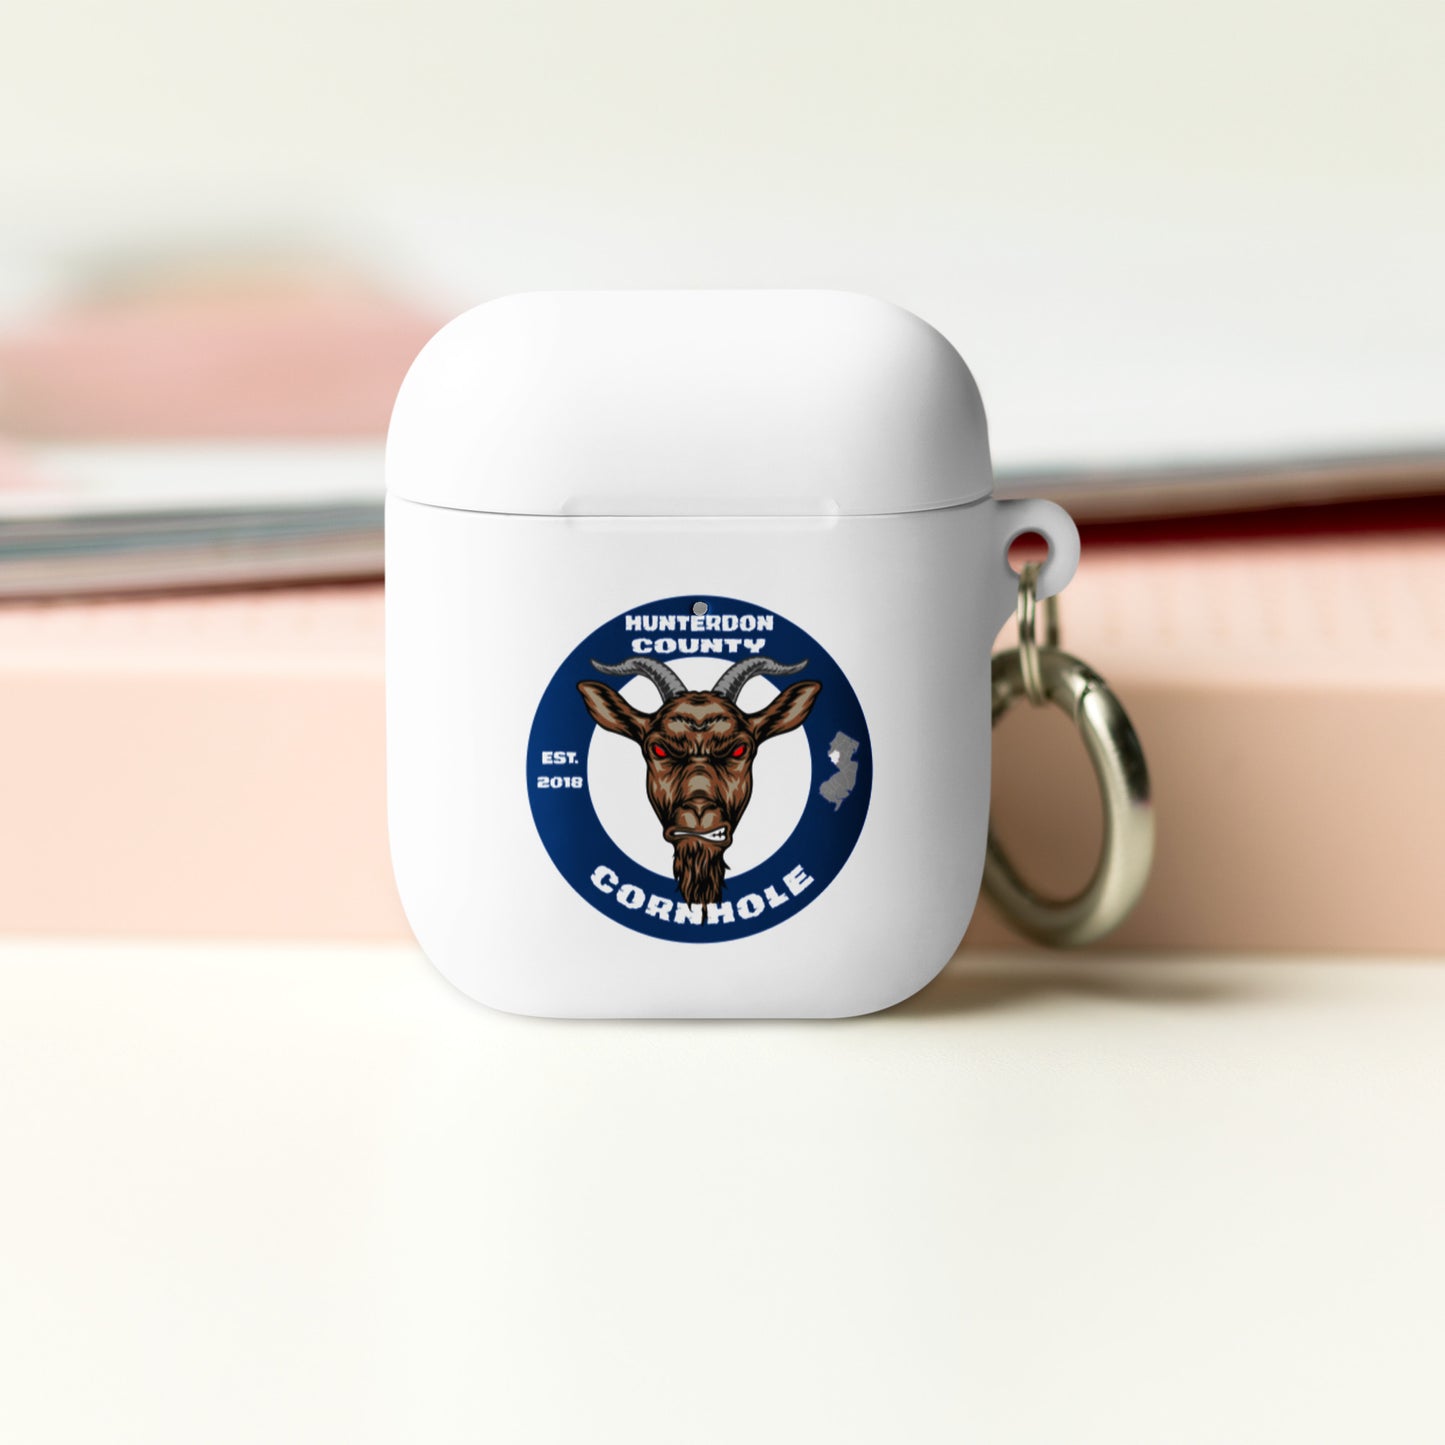 HCC "Brownie" logo AirPods case